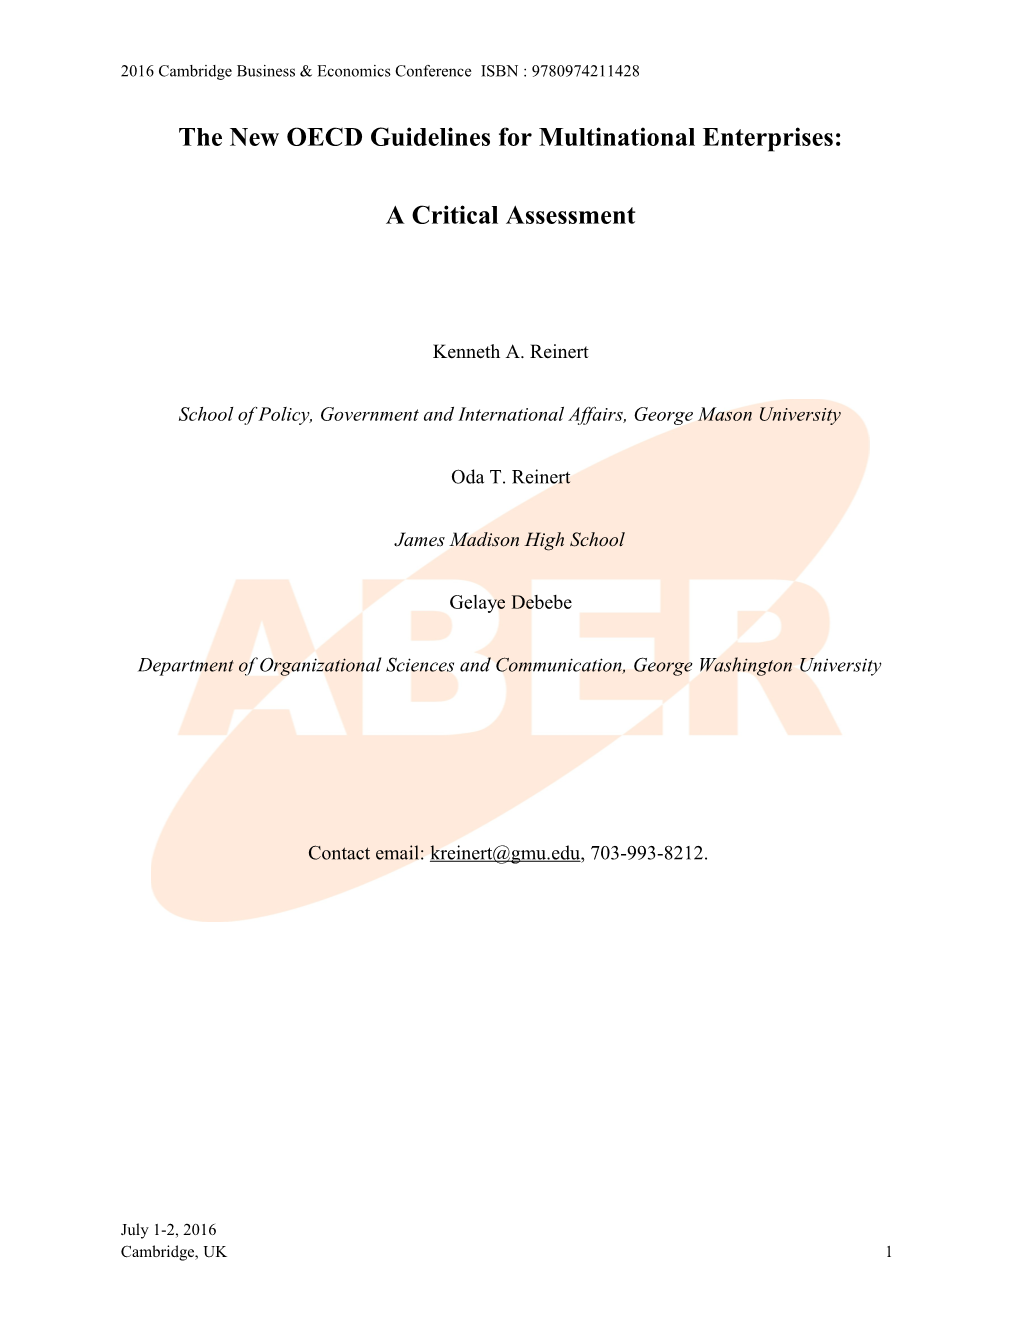 The New OECD Guidelines for Multinational Enterprises: a Critical Assessment